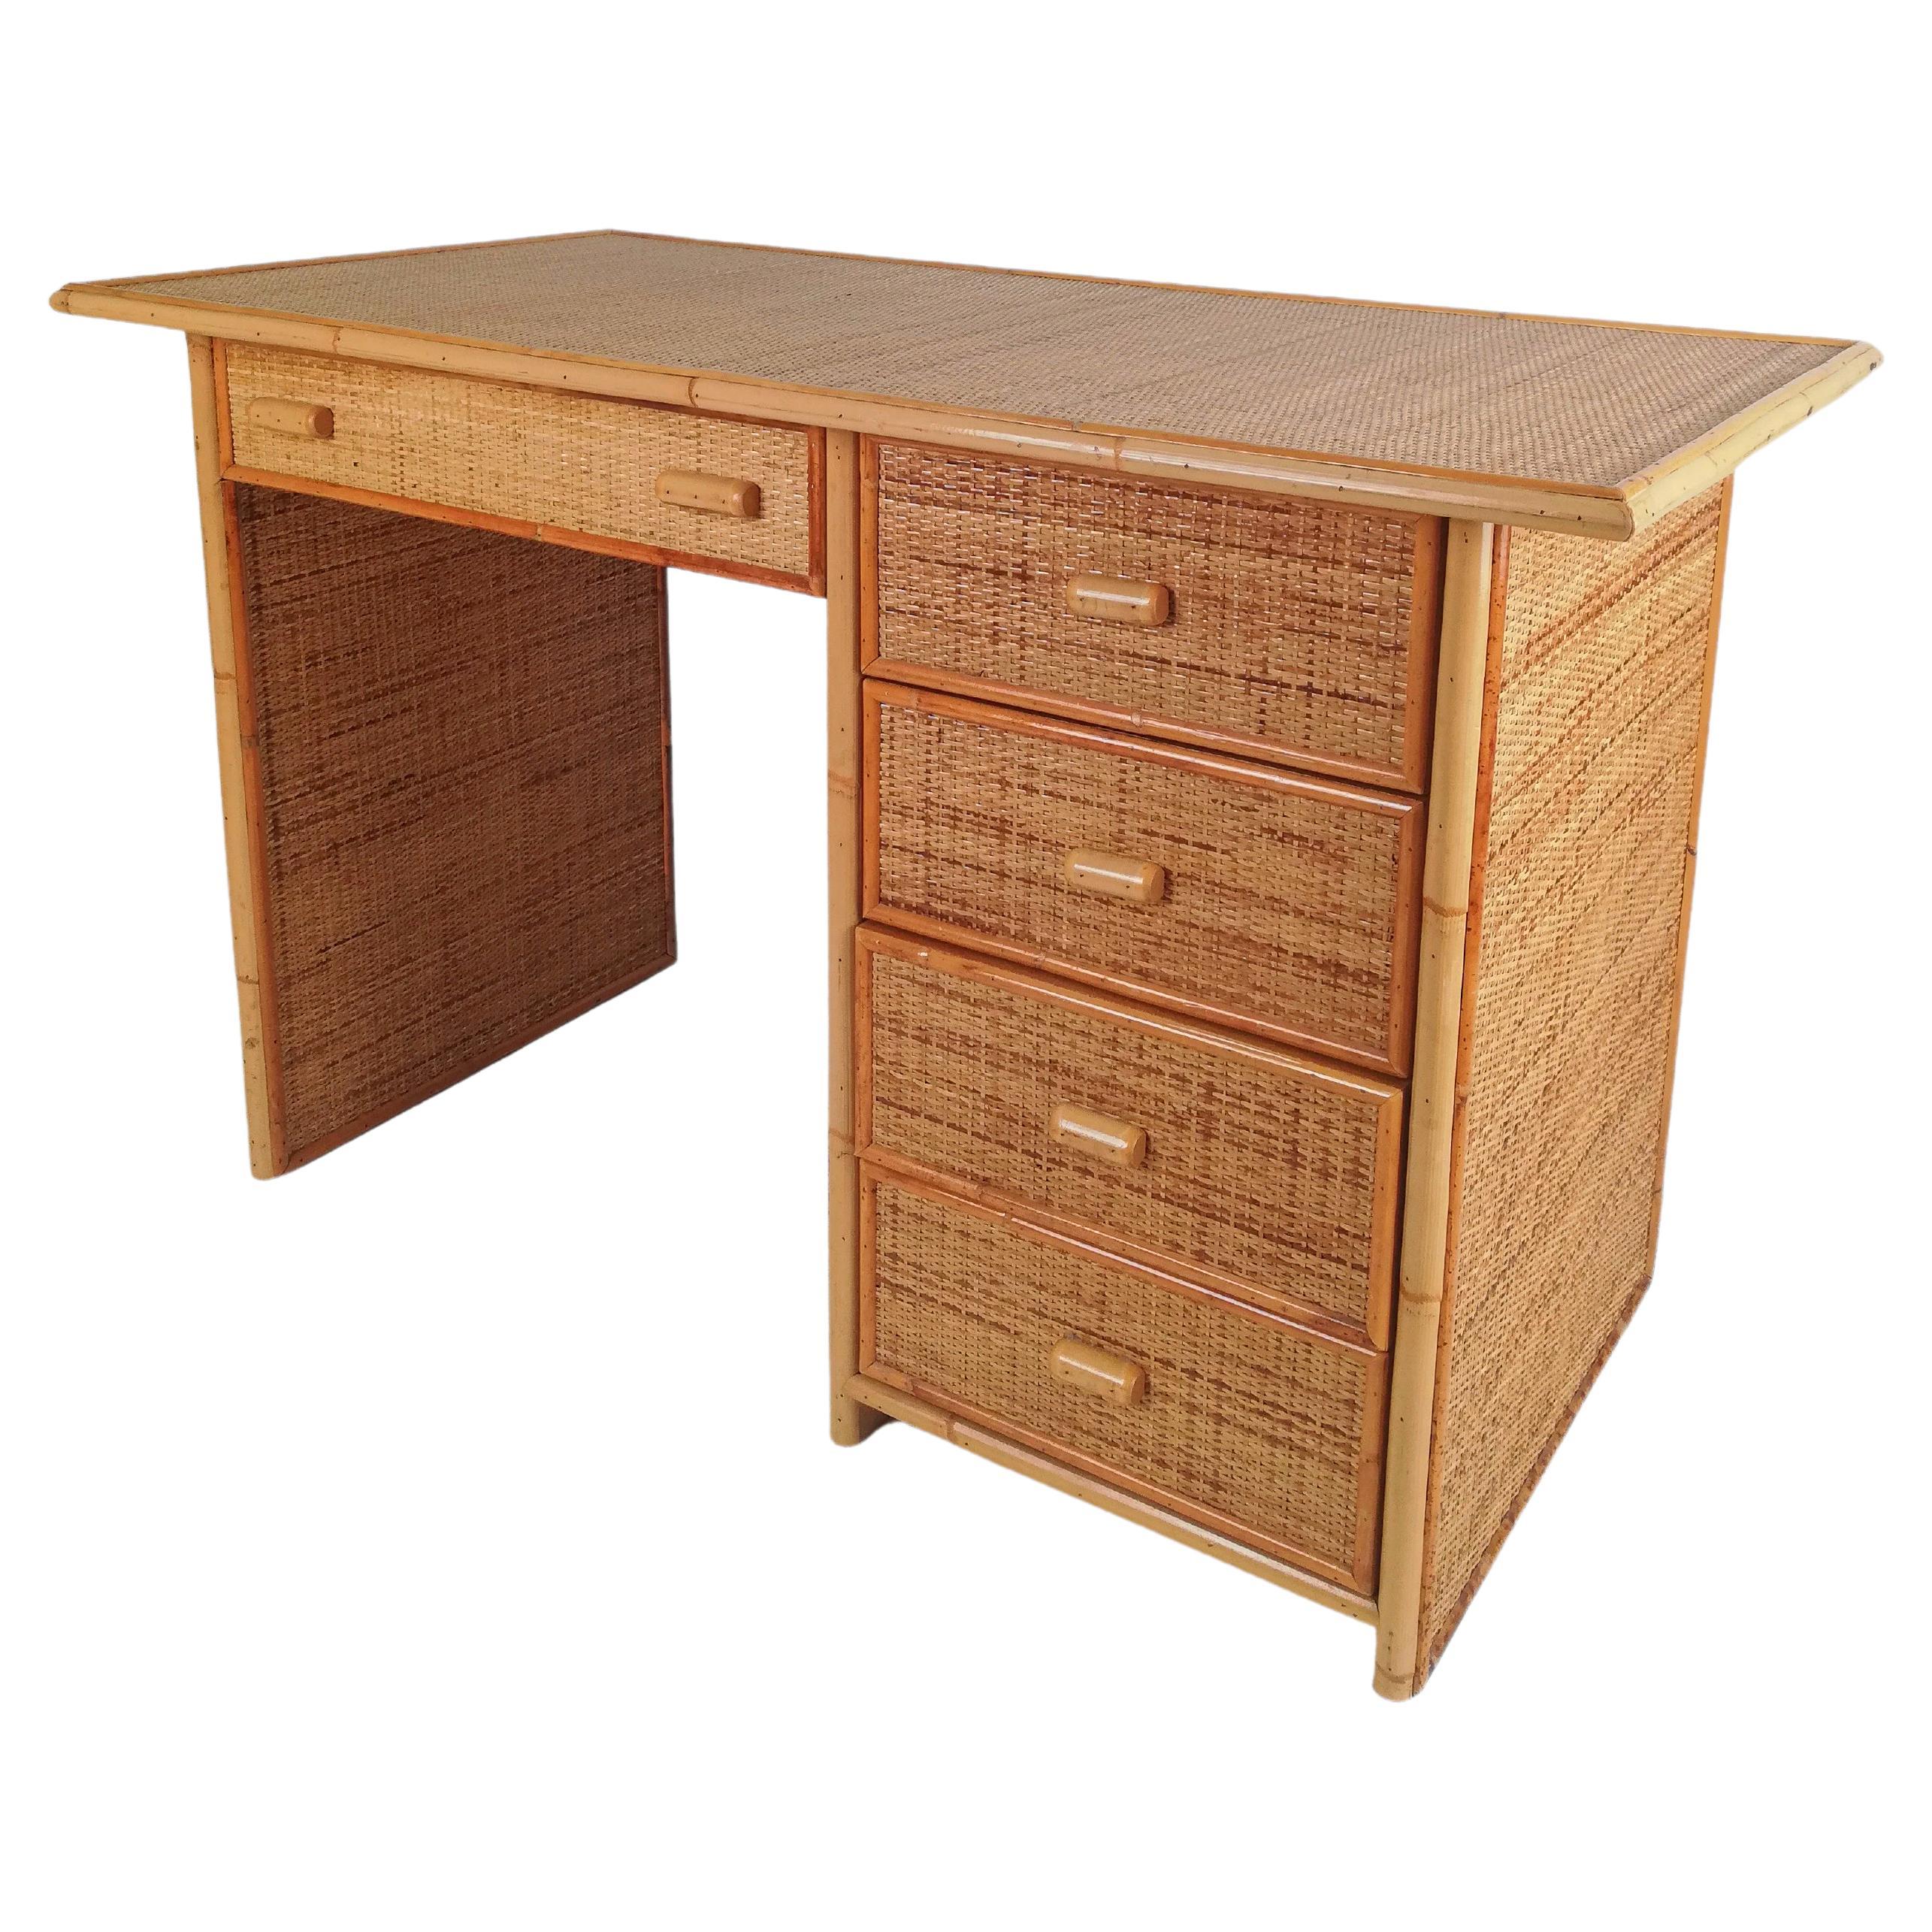 Vintage Italian Writing Desk with Drawers in Bamboo, Rattan and Plywood, 1970s For Sale